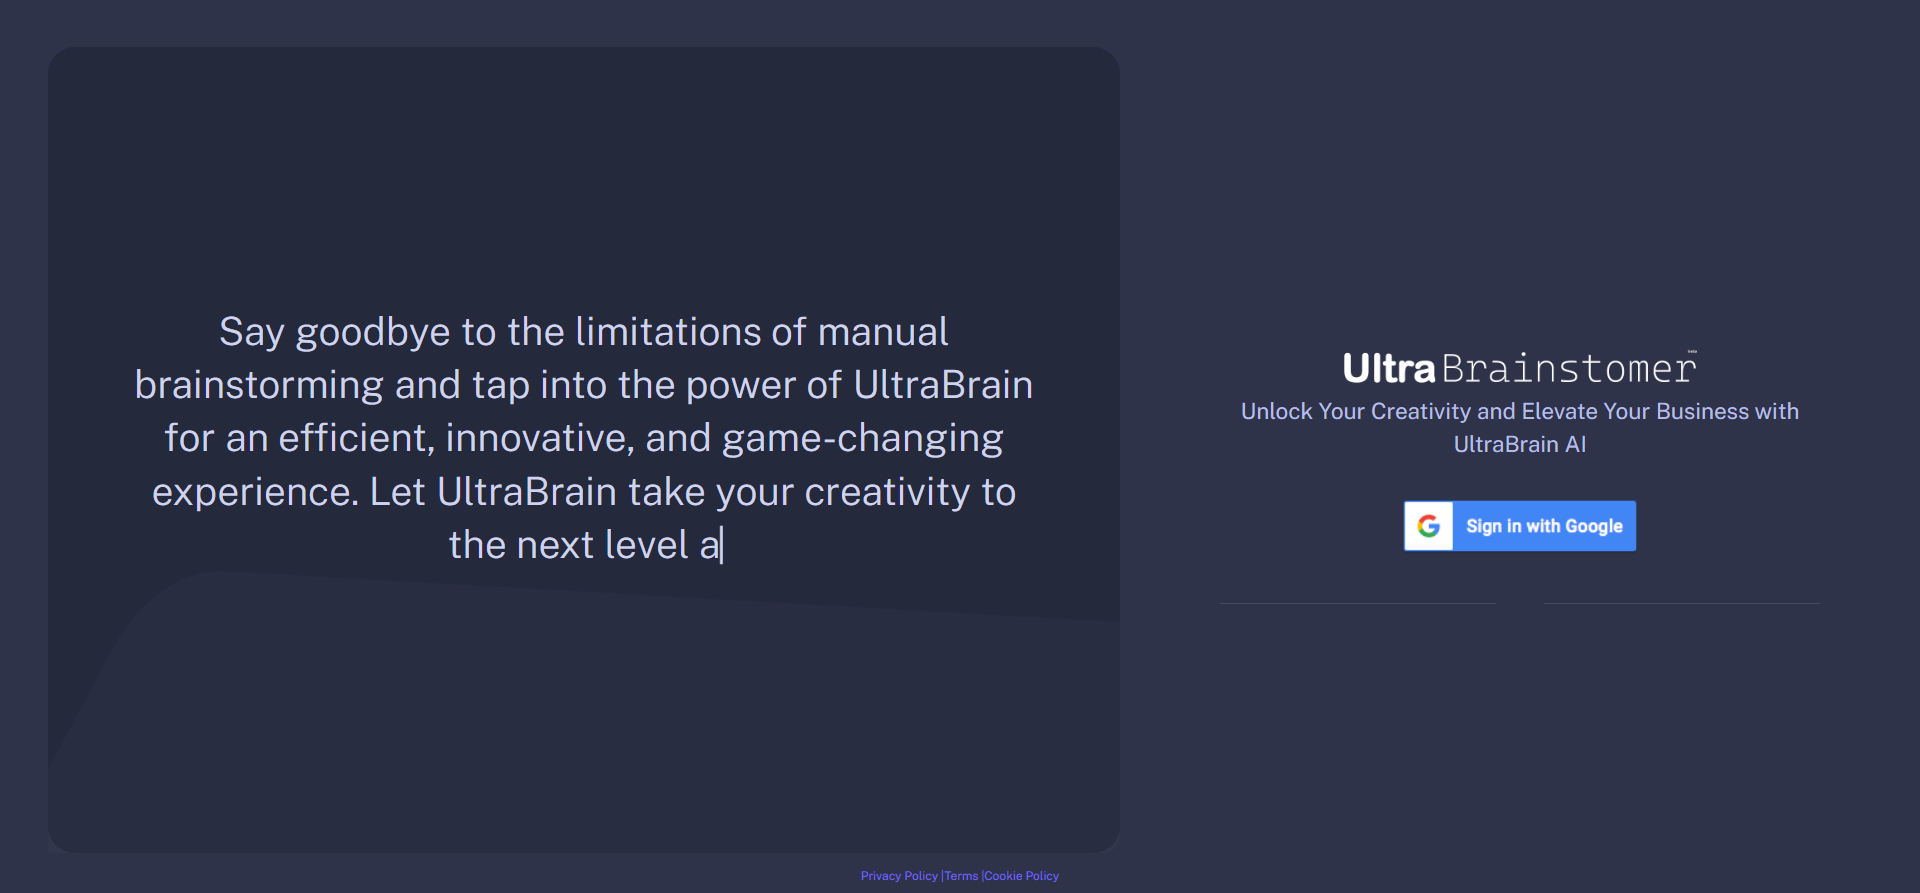 Unleash Your Creativity with Ultrabrainstormer.com: The Ultimate AI-Powered Brainstorming Tool!